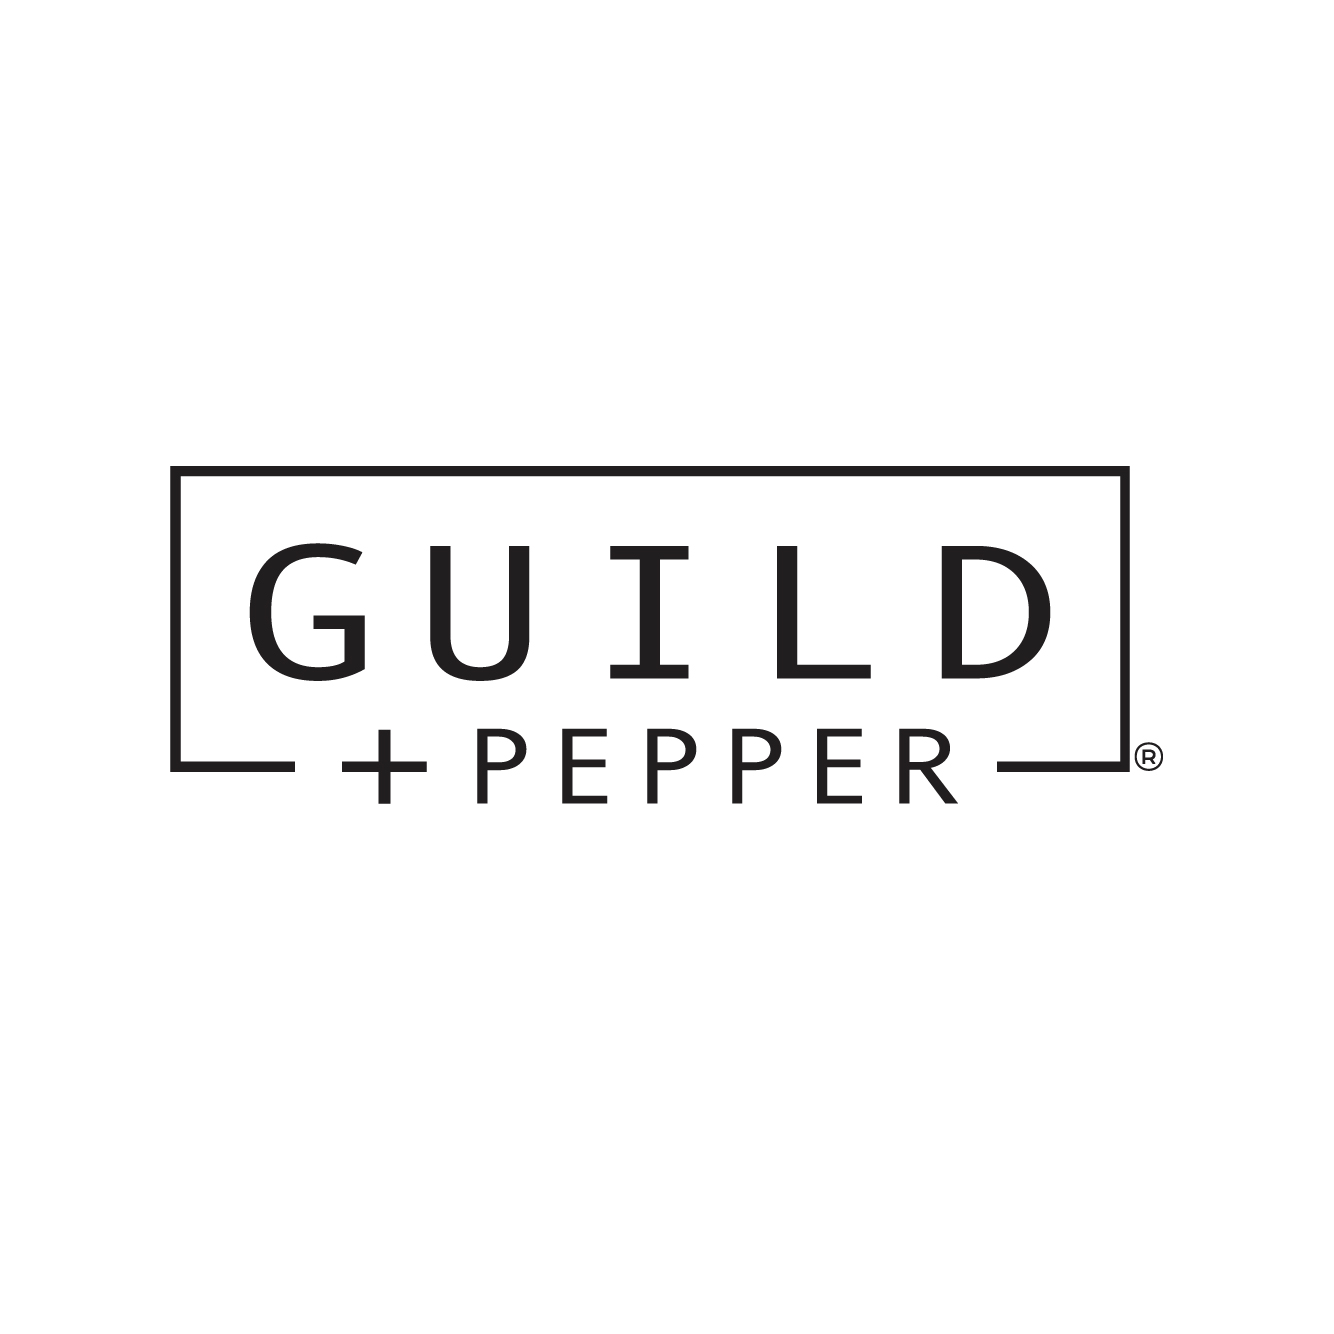 Guild+Pepper Hotelier Collection